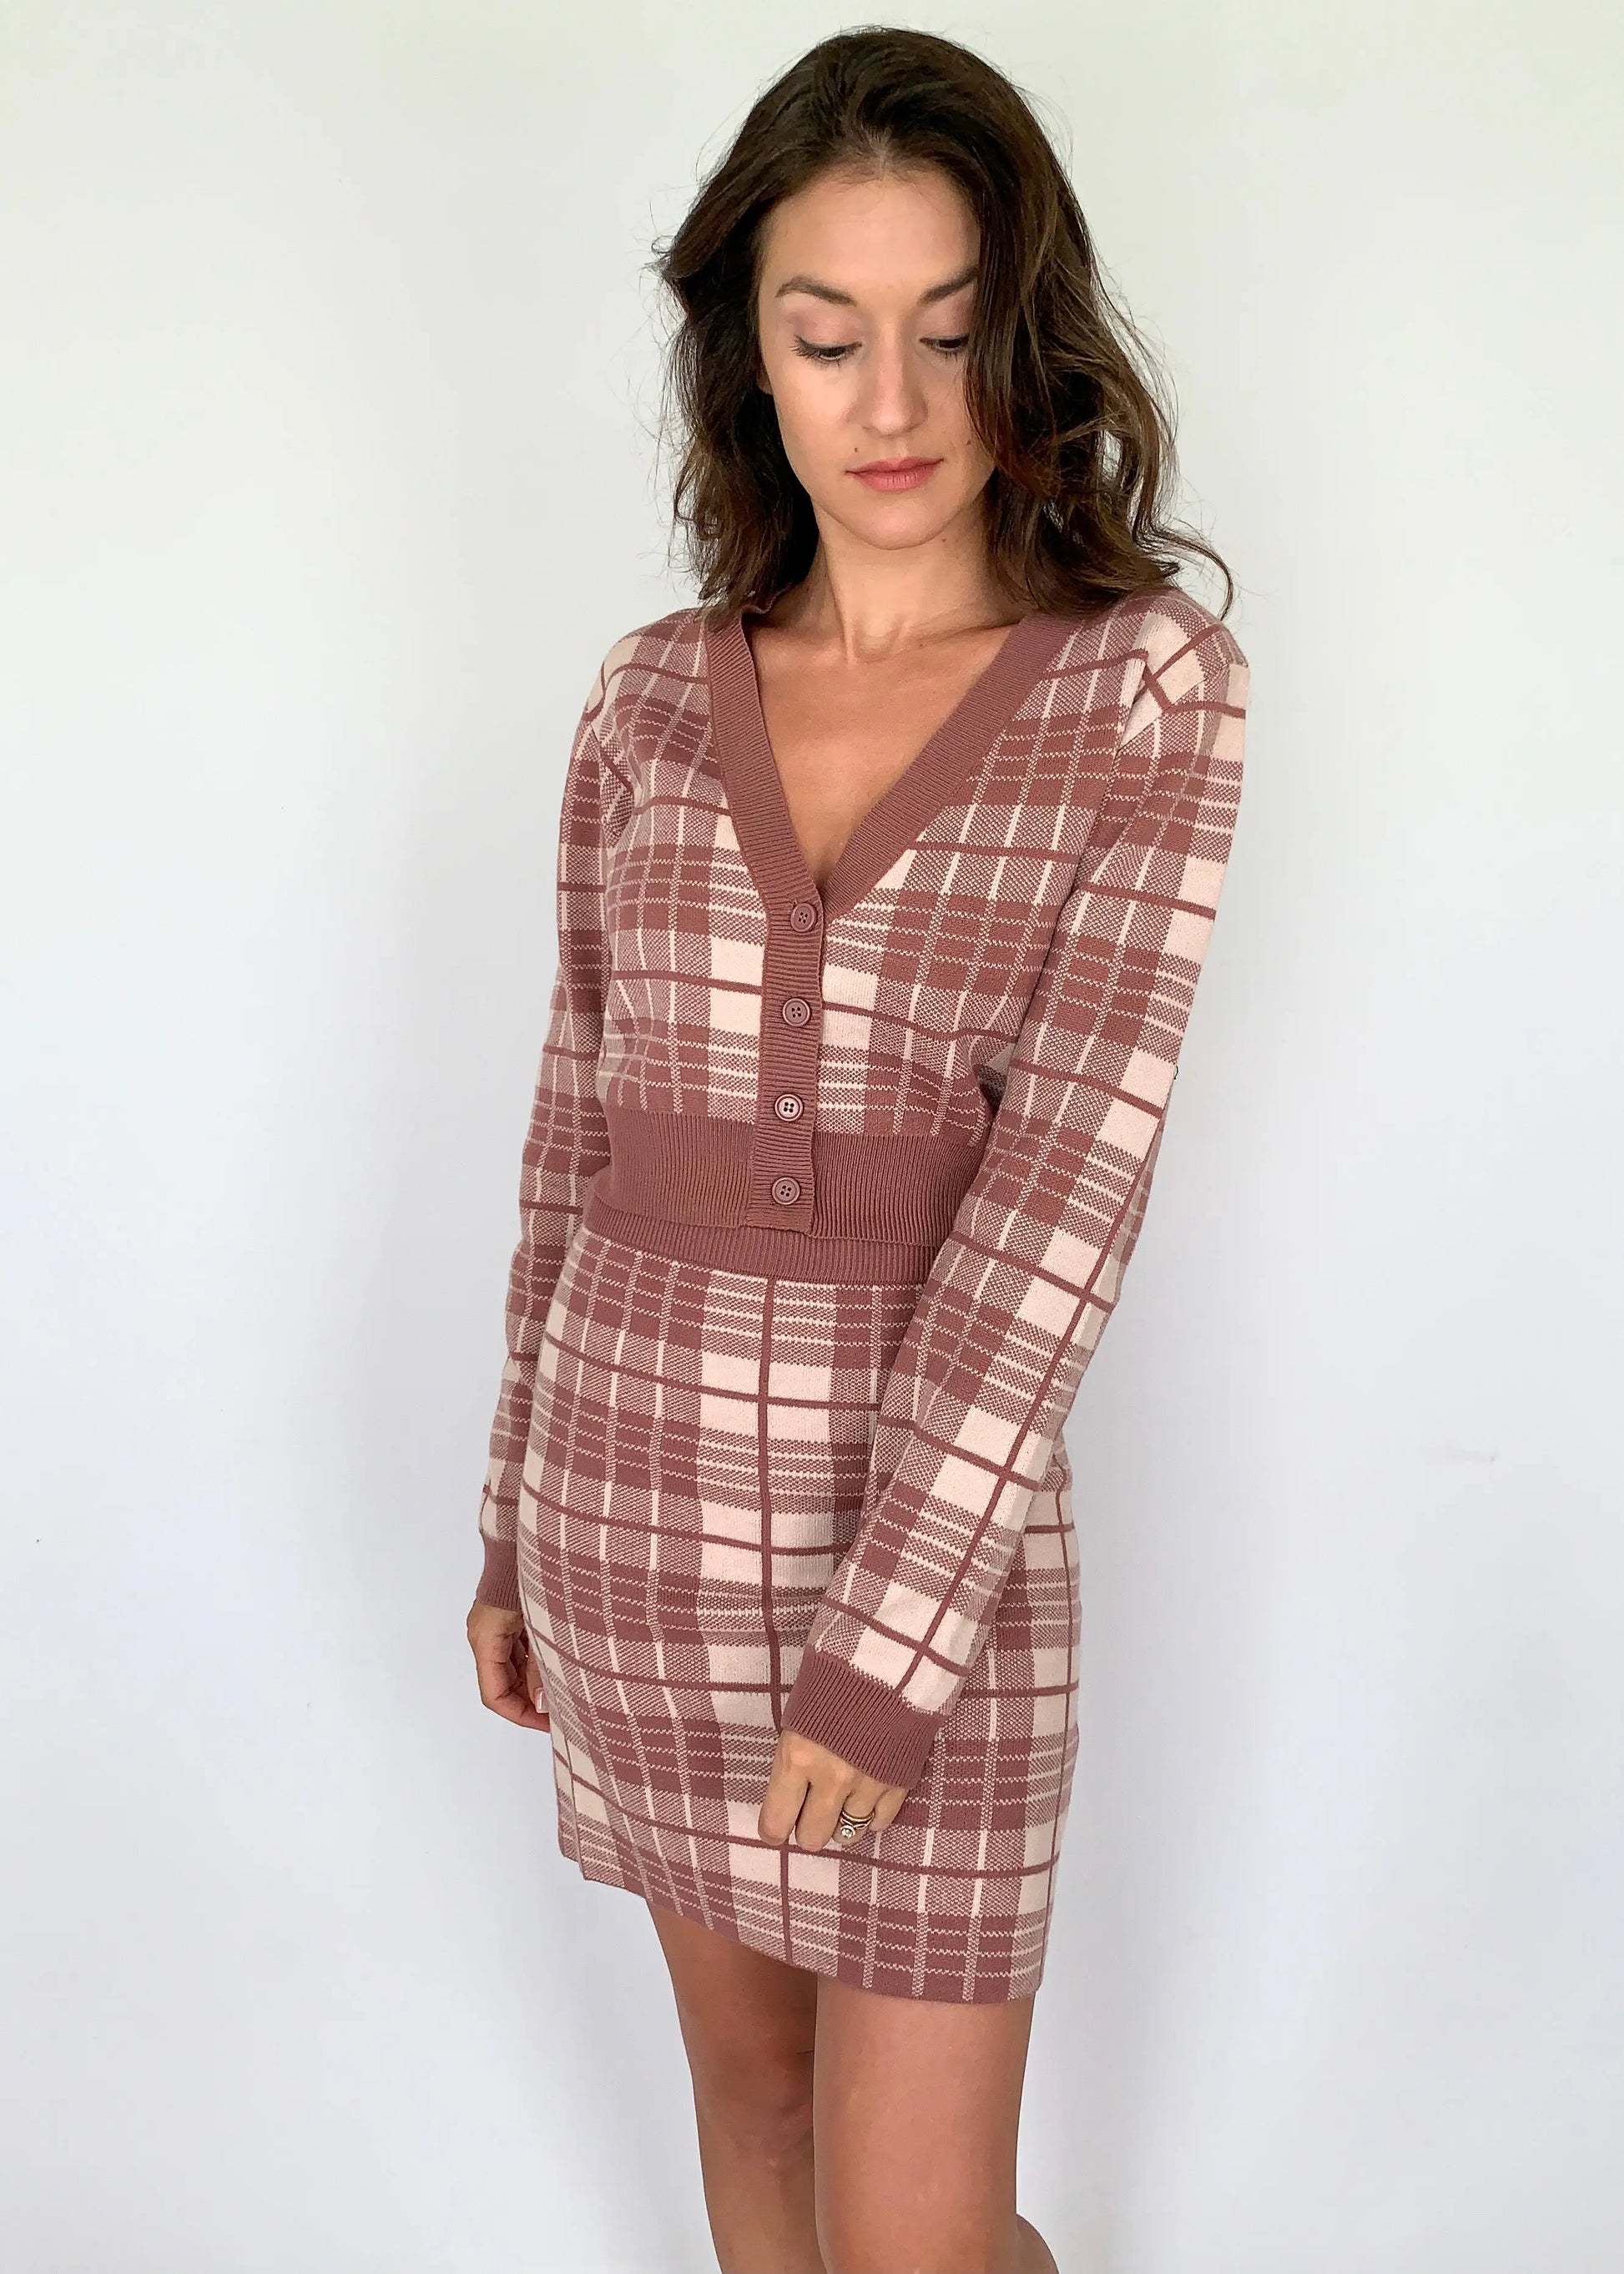 A model wearing a mauve plaid v-neck cropped cardigan with matching skirt